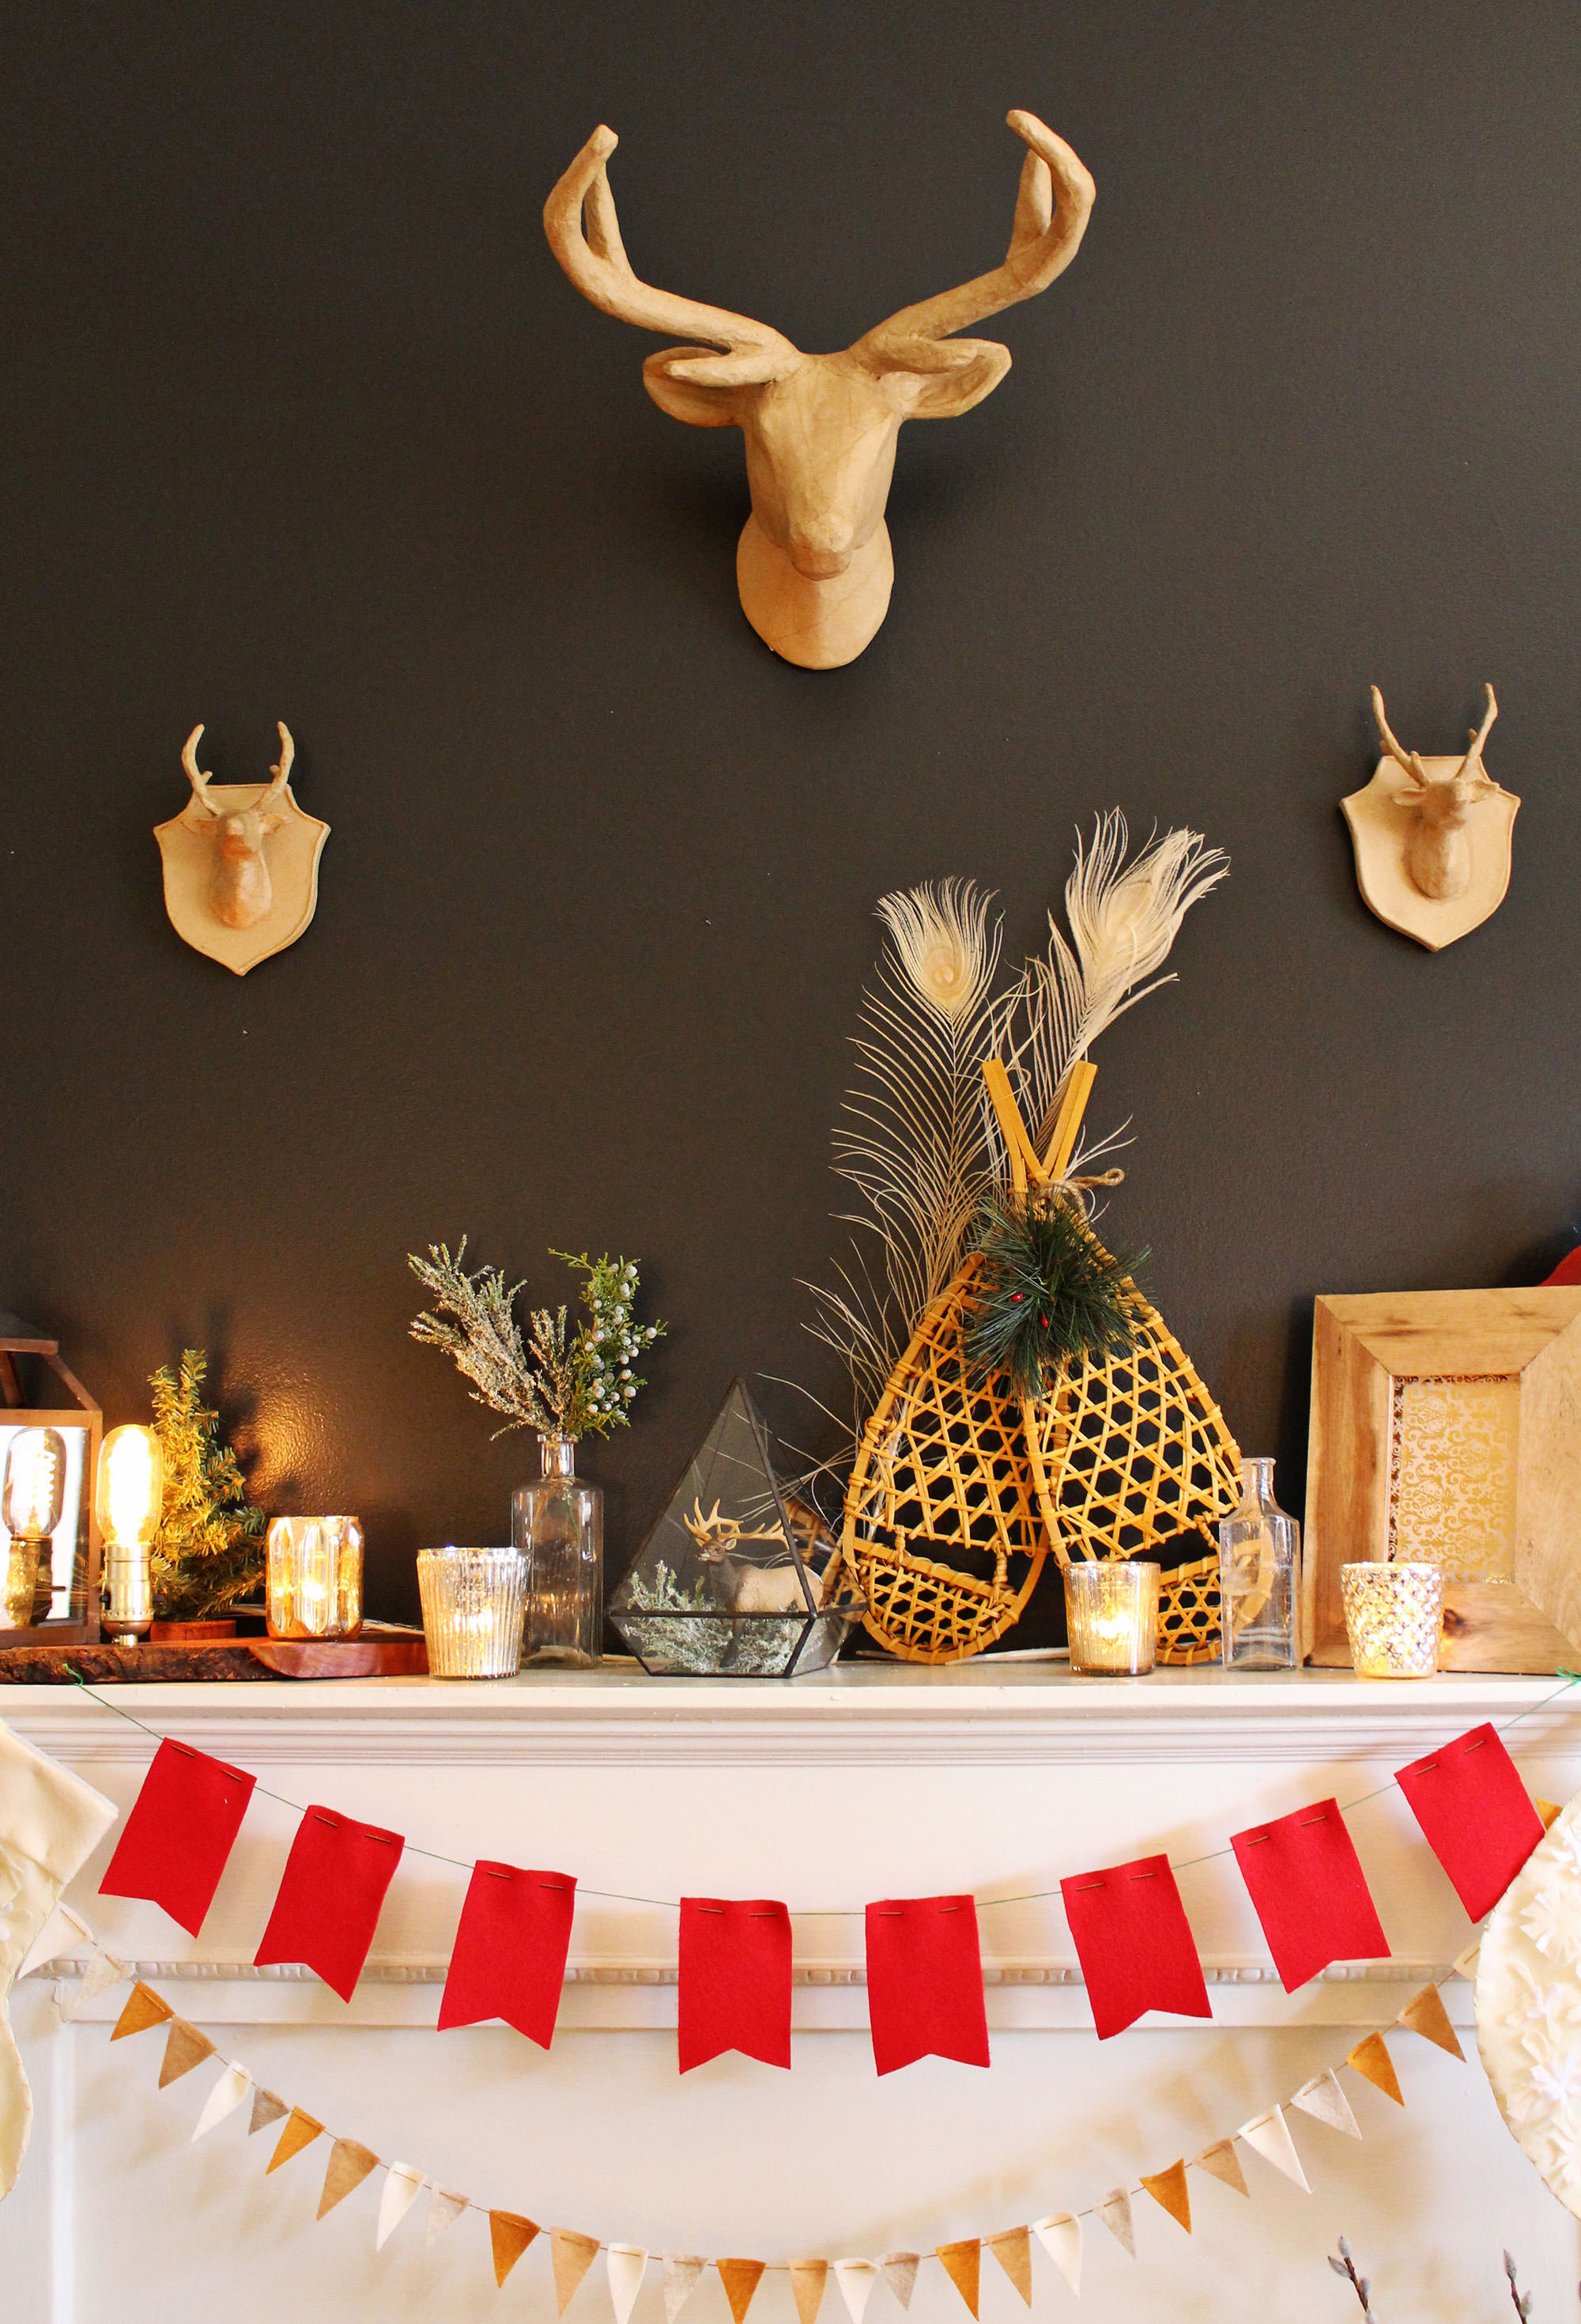 Use paper mache taxidermy above your holiday mantel display